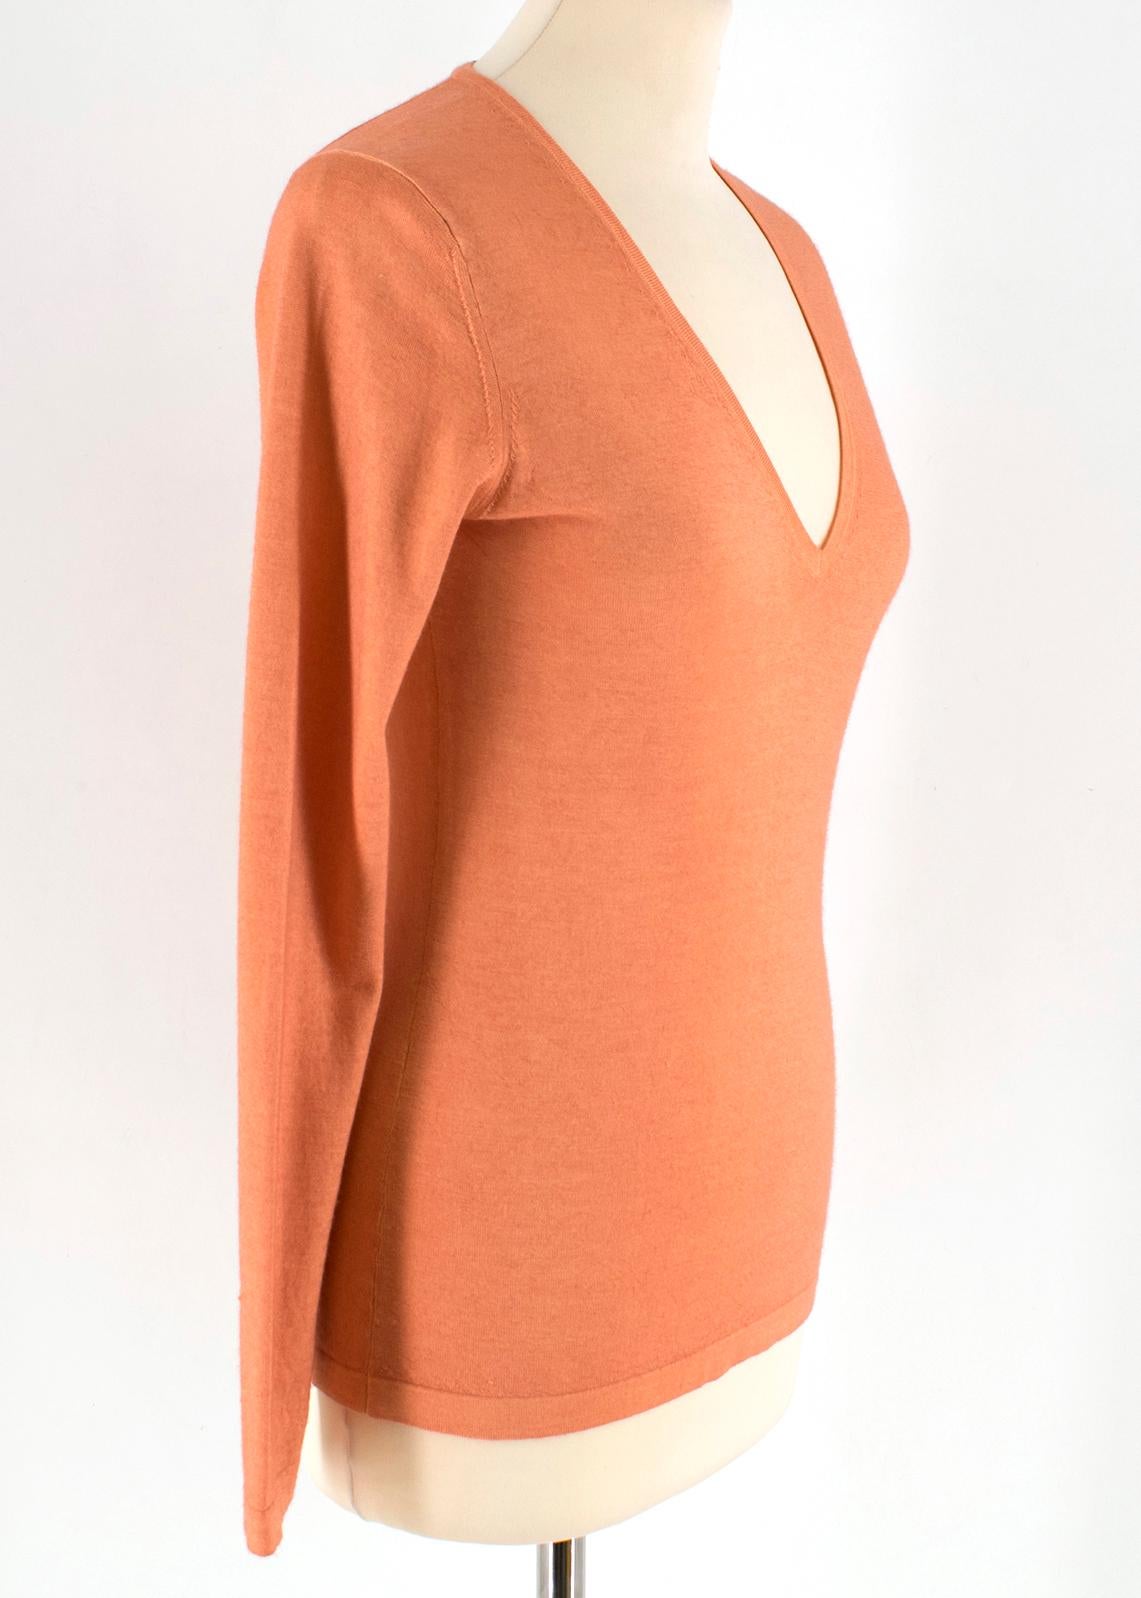 Colombo Peach Cashmere Long sleeve Top

- cashmere peach top
- v neckline
- soft and lightweight 
- long sleeve

Please note, these items are pre-owned and may show some signs of storage, even when unworn and unused. This is reflected within the